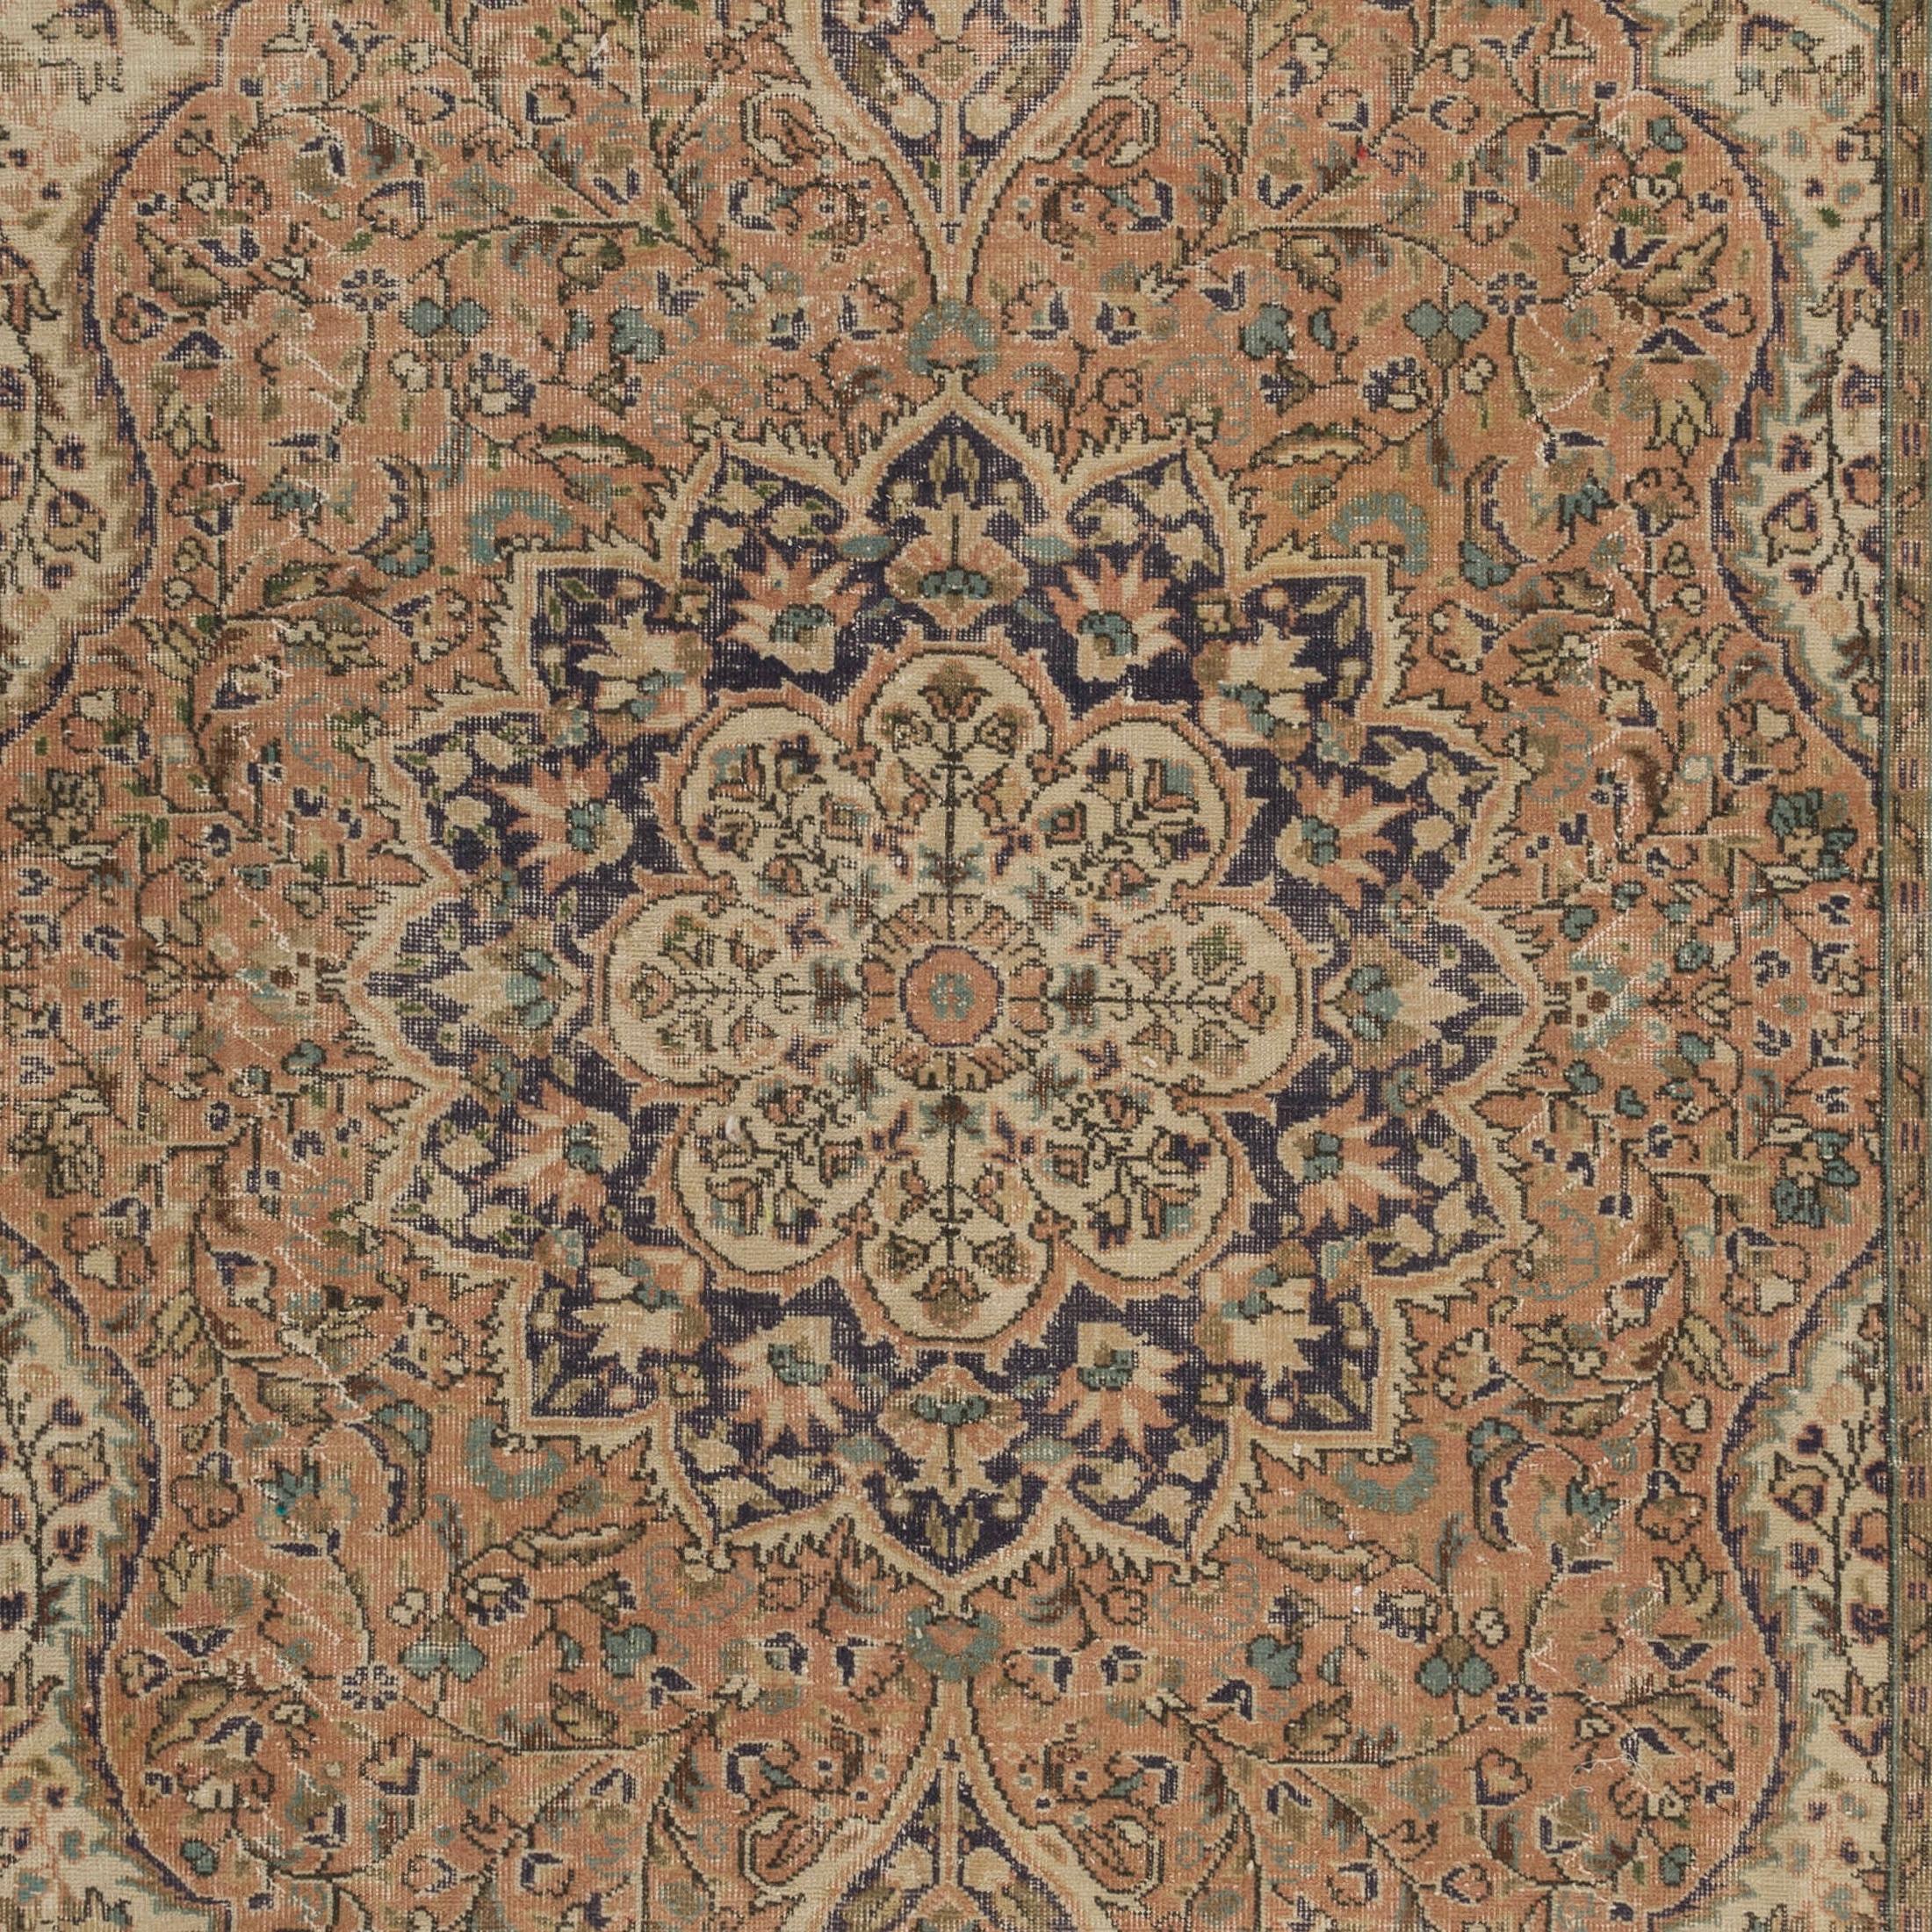 A finely hand-knotted, intricately decorated vintage Turkish Oushak area rug from the 1960s featuring an elegant medallion and lush scrolling vines inside nested curvilinear frames, in faded rose, beige, sand, indigo blue and ice blue. Size: 6.7 x